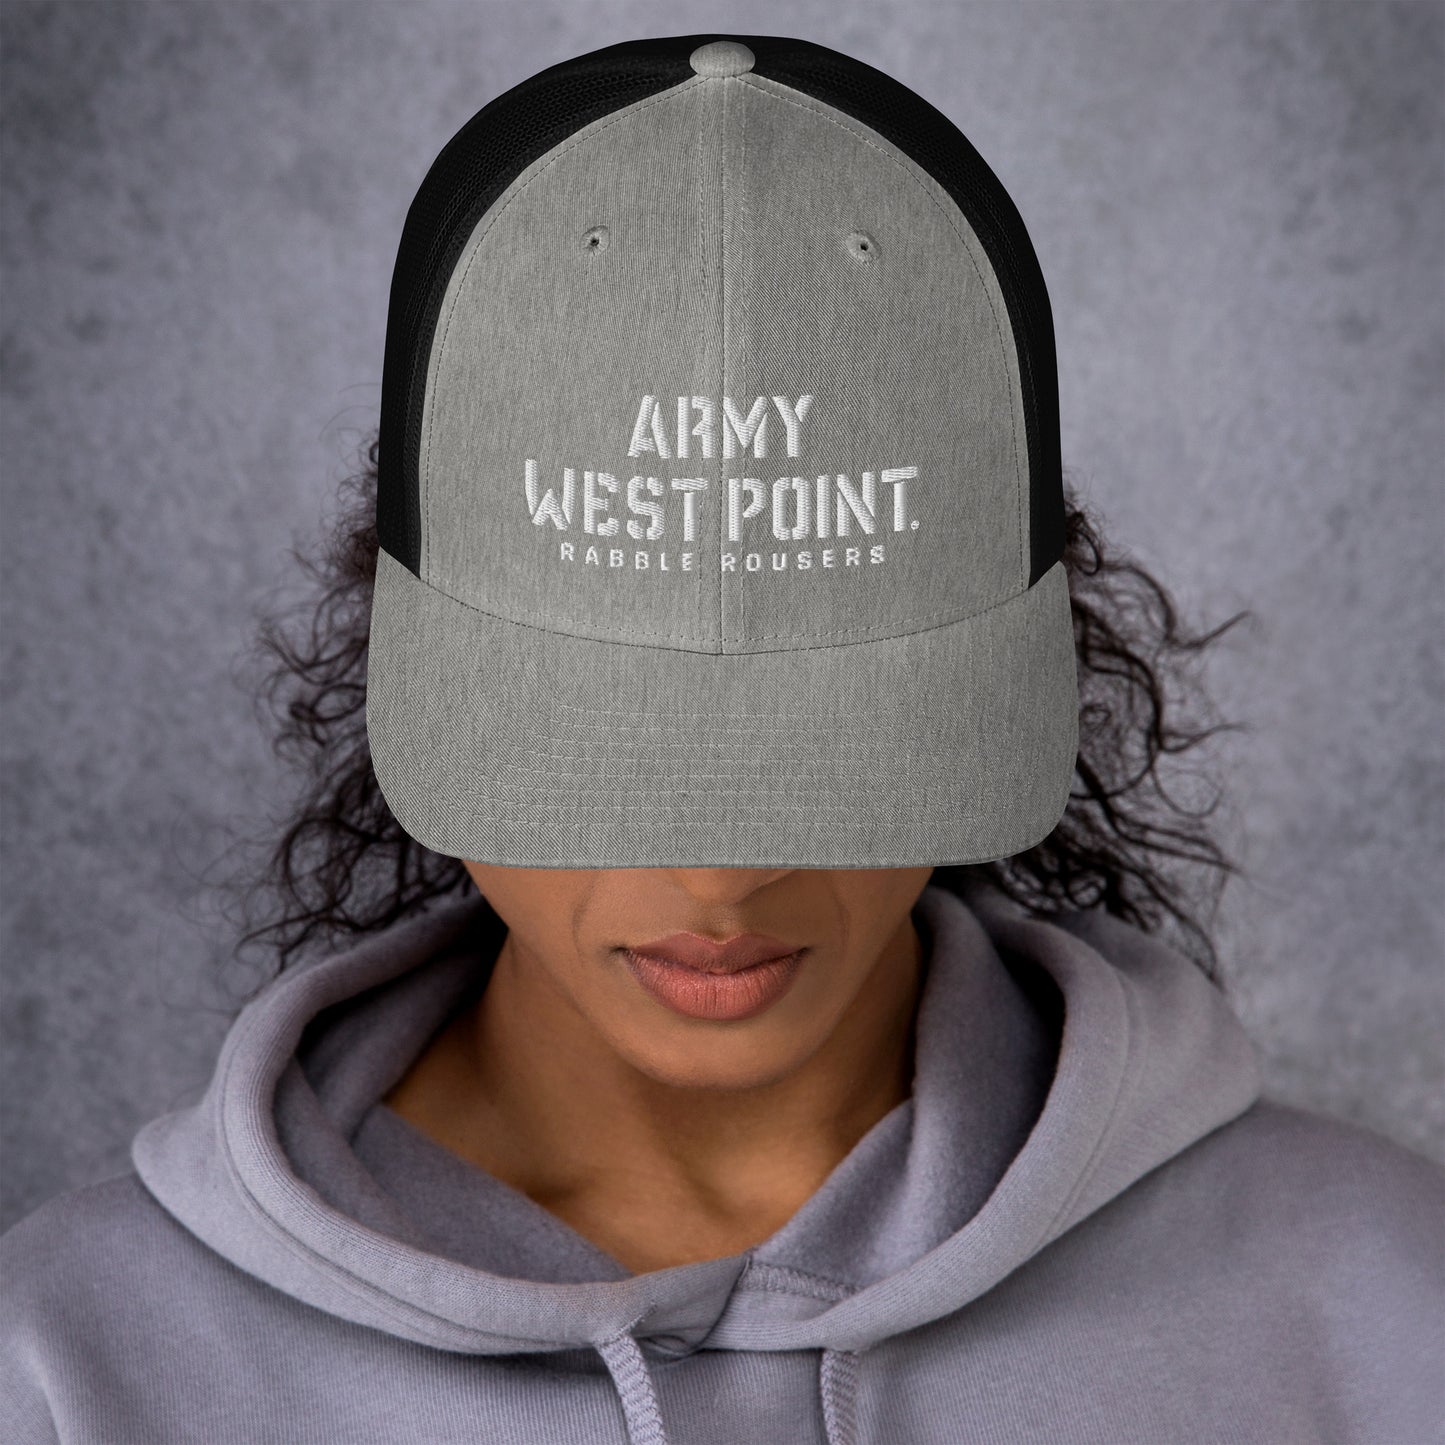 Army West Point Rabble Rousers Trucker Cap (White Thread)